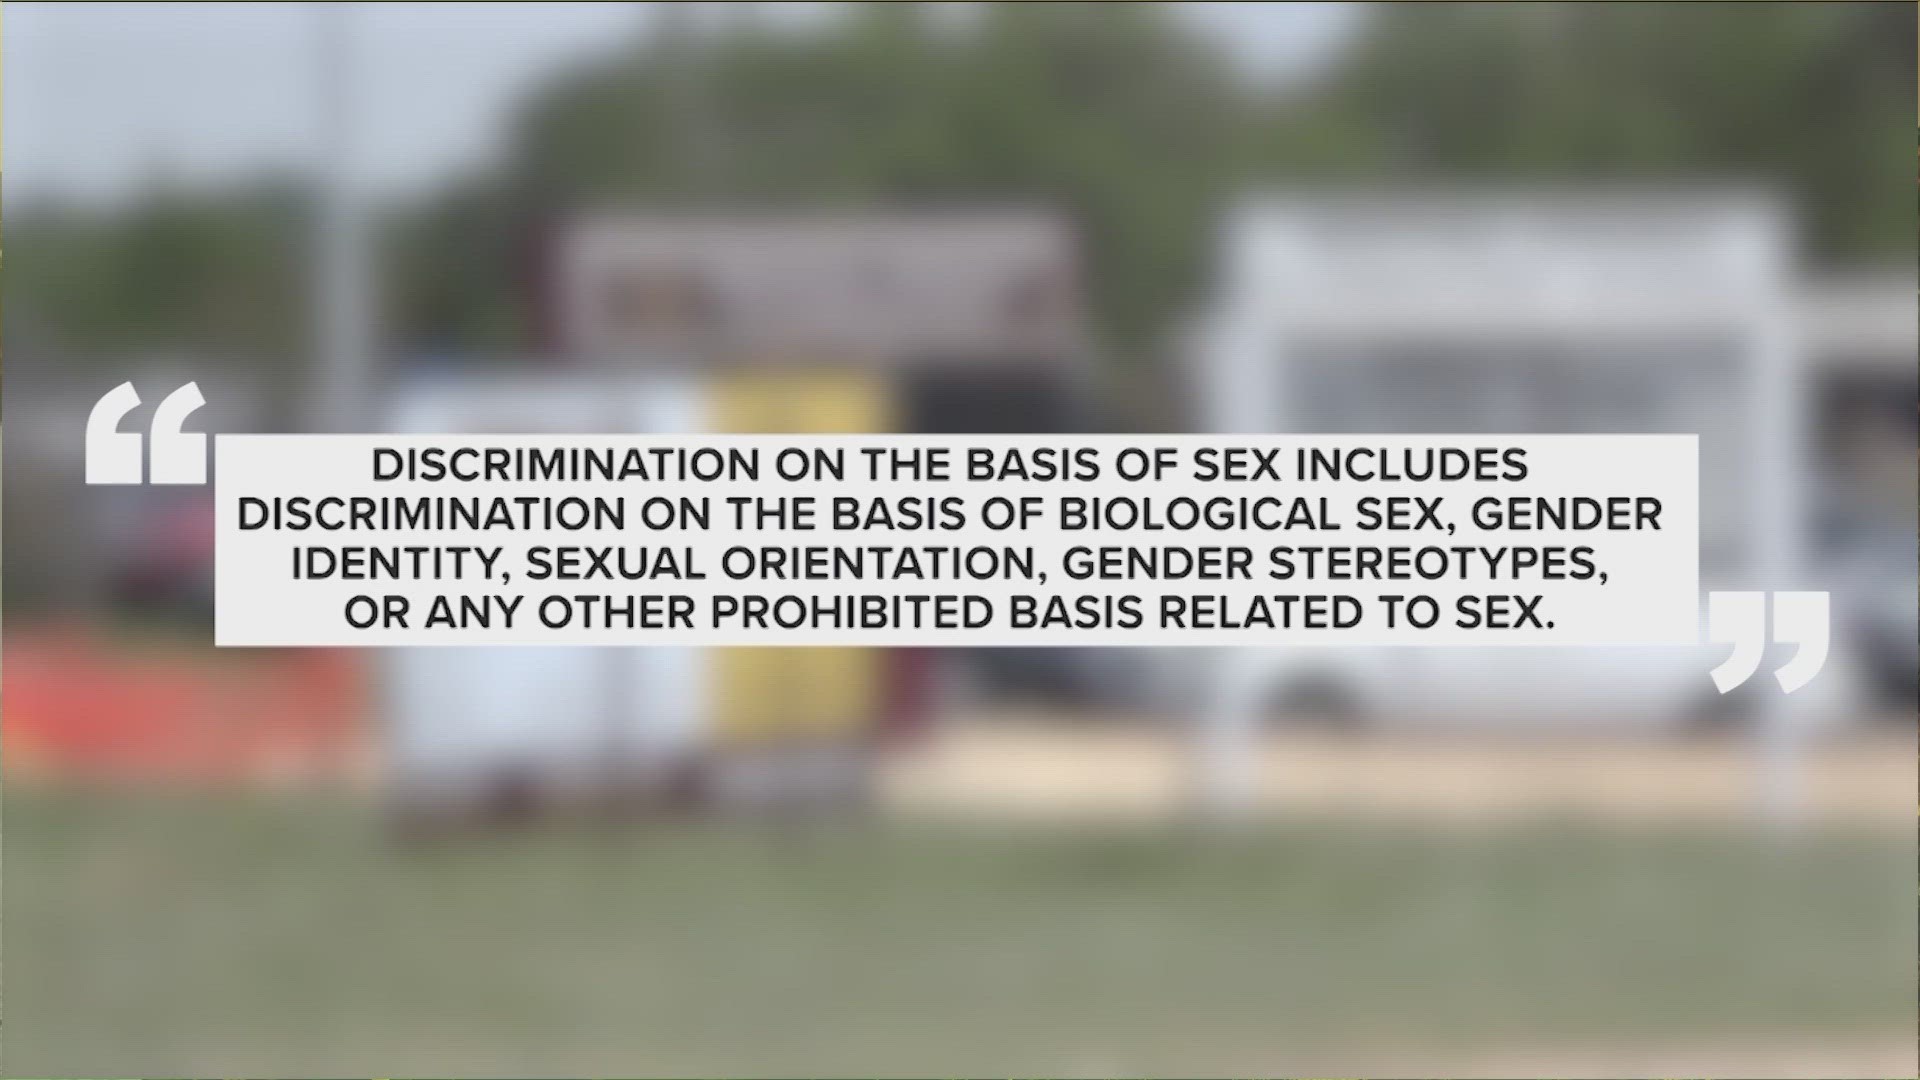 The proposed changes would remove protections regarding sexual orientation and gender identity.